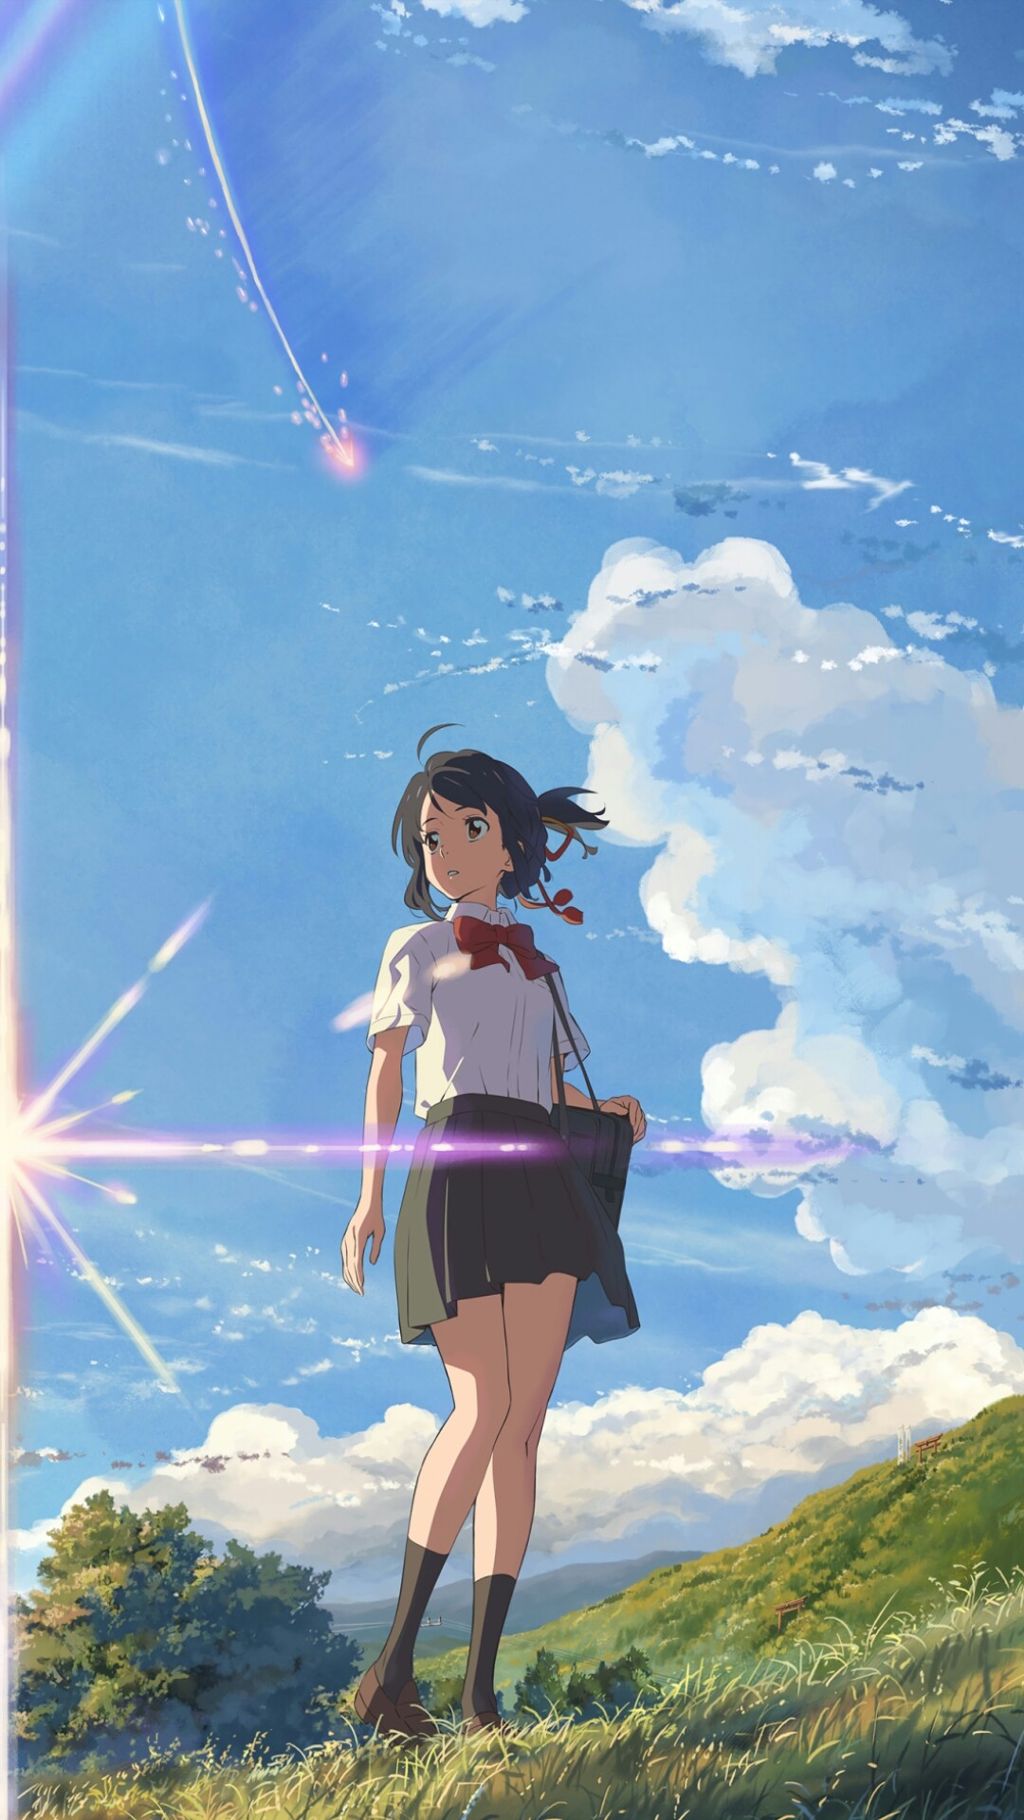 your name wallpaper,sky,summer,illustration,happy,anime